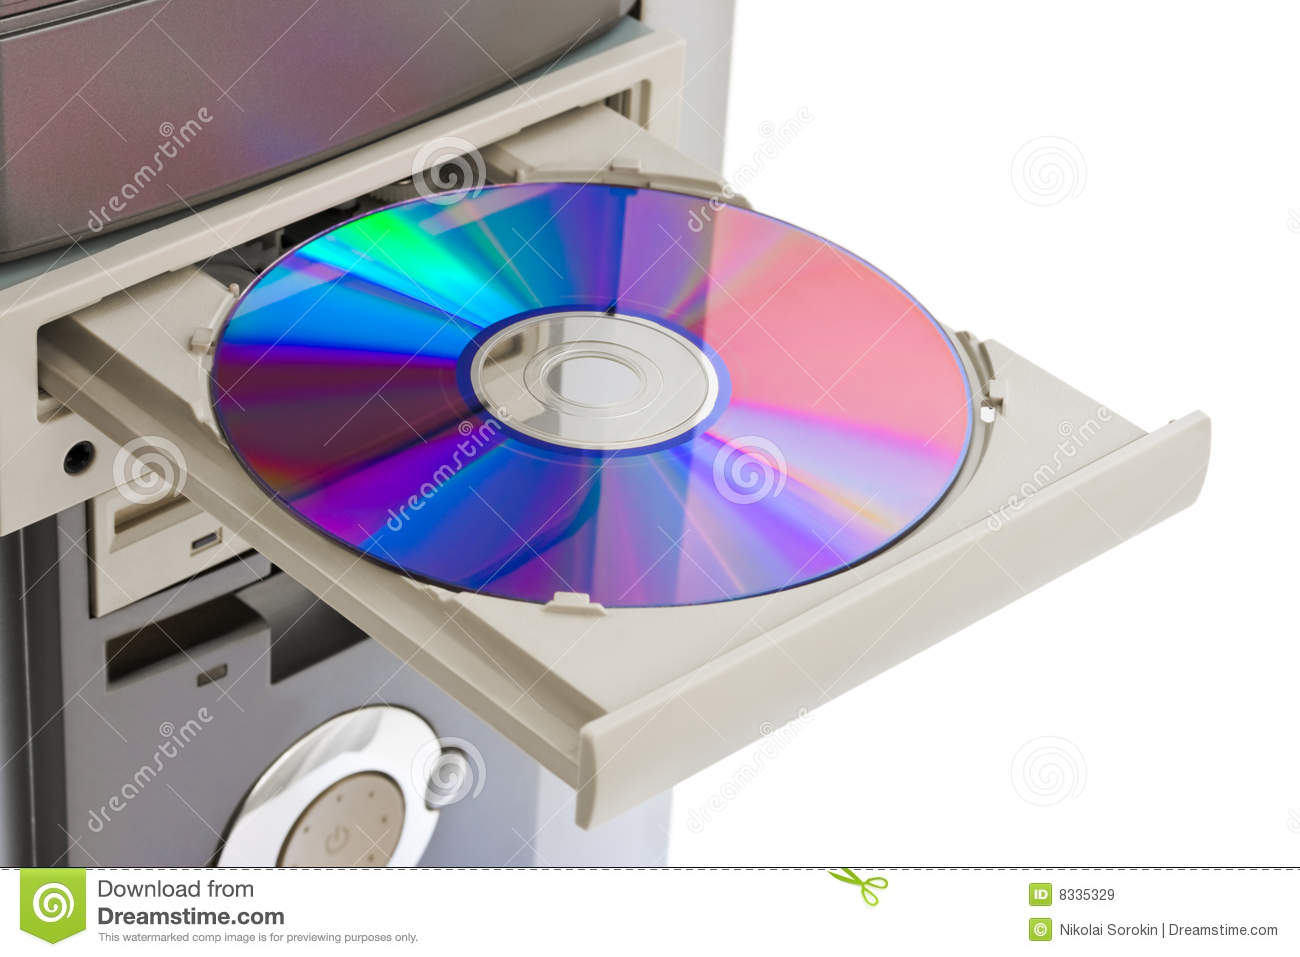 More Similar Stock Images Of   Computer Cd Rom